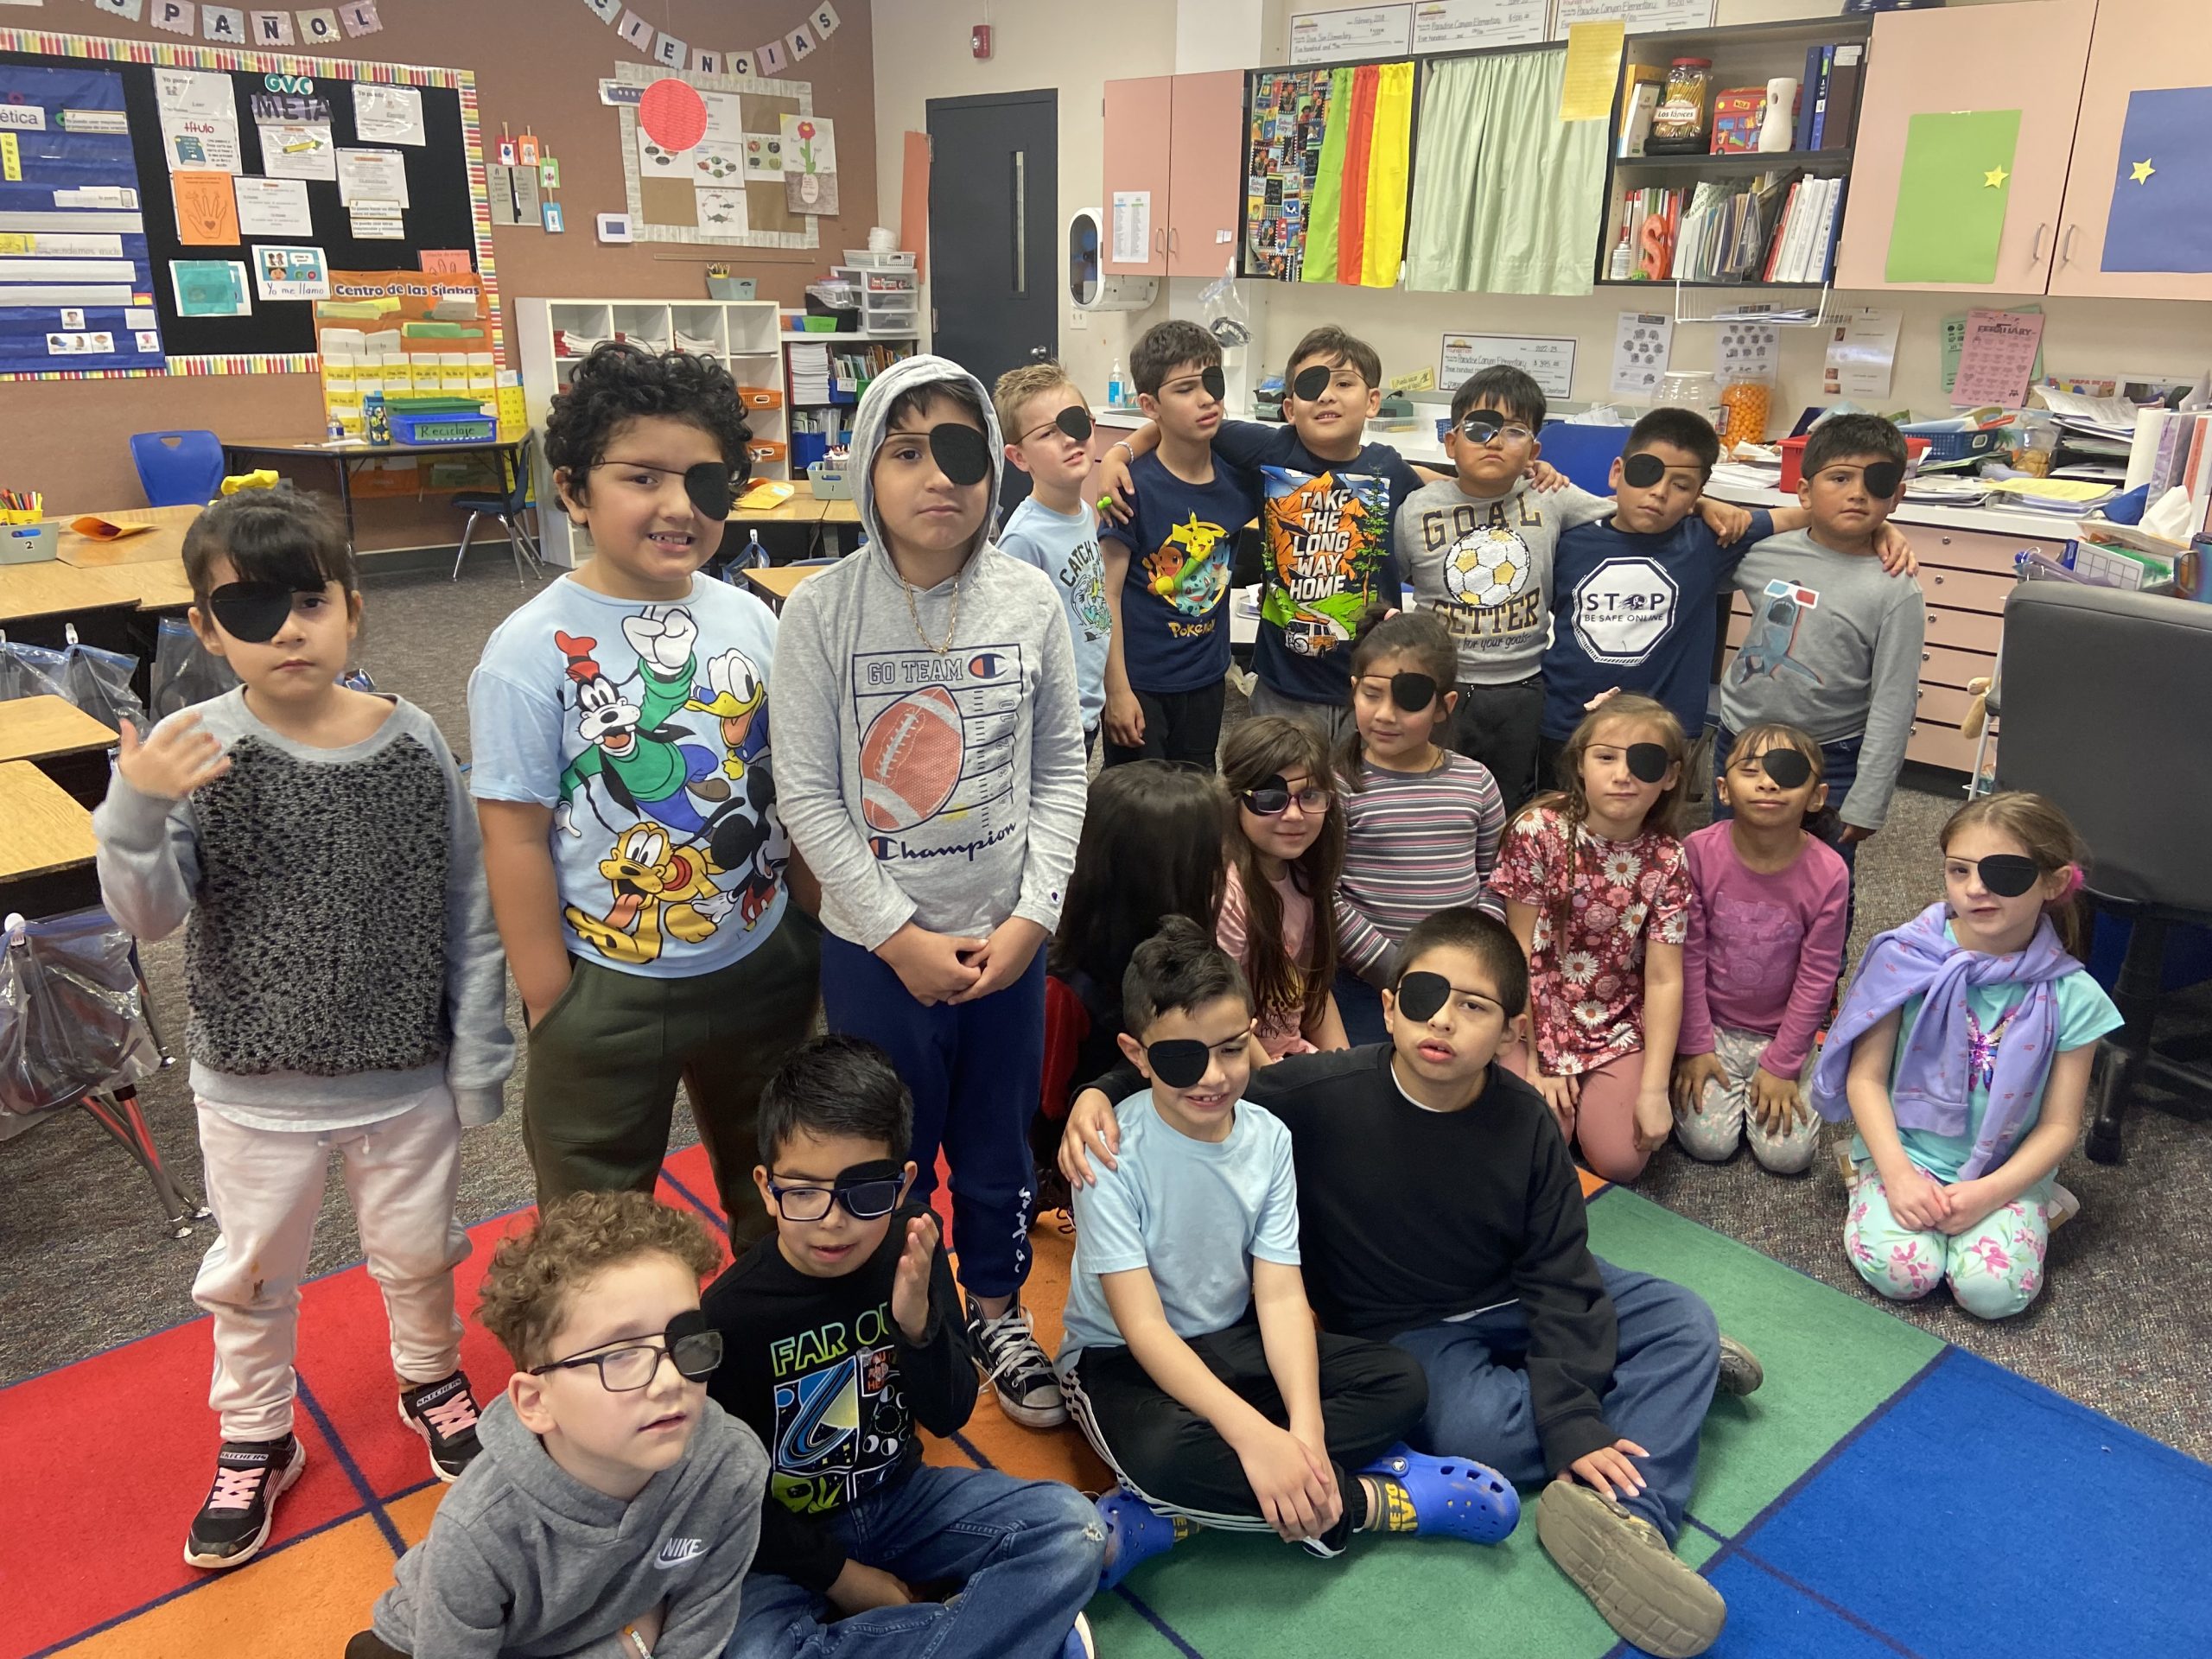 Students in eyepatches for Pirate Day